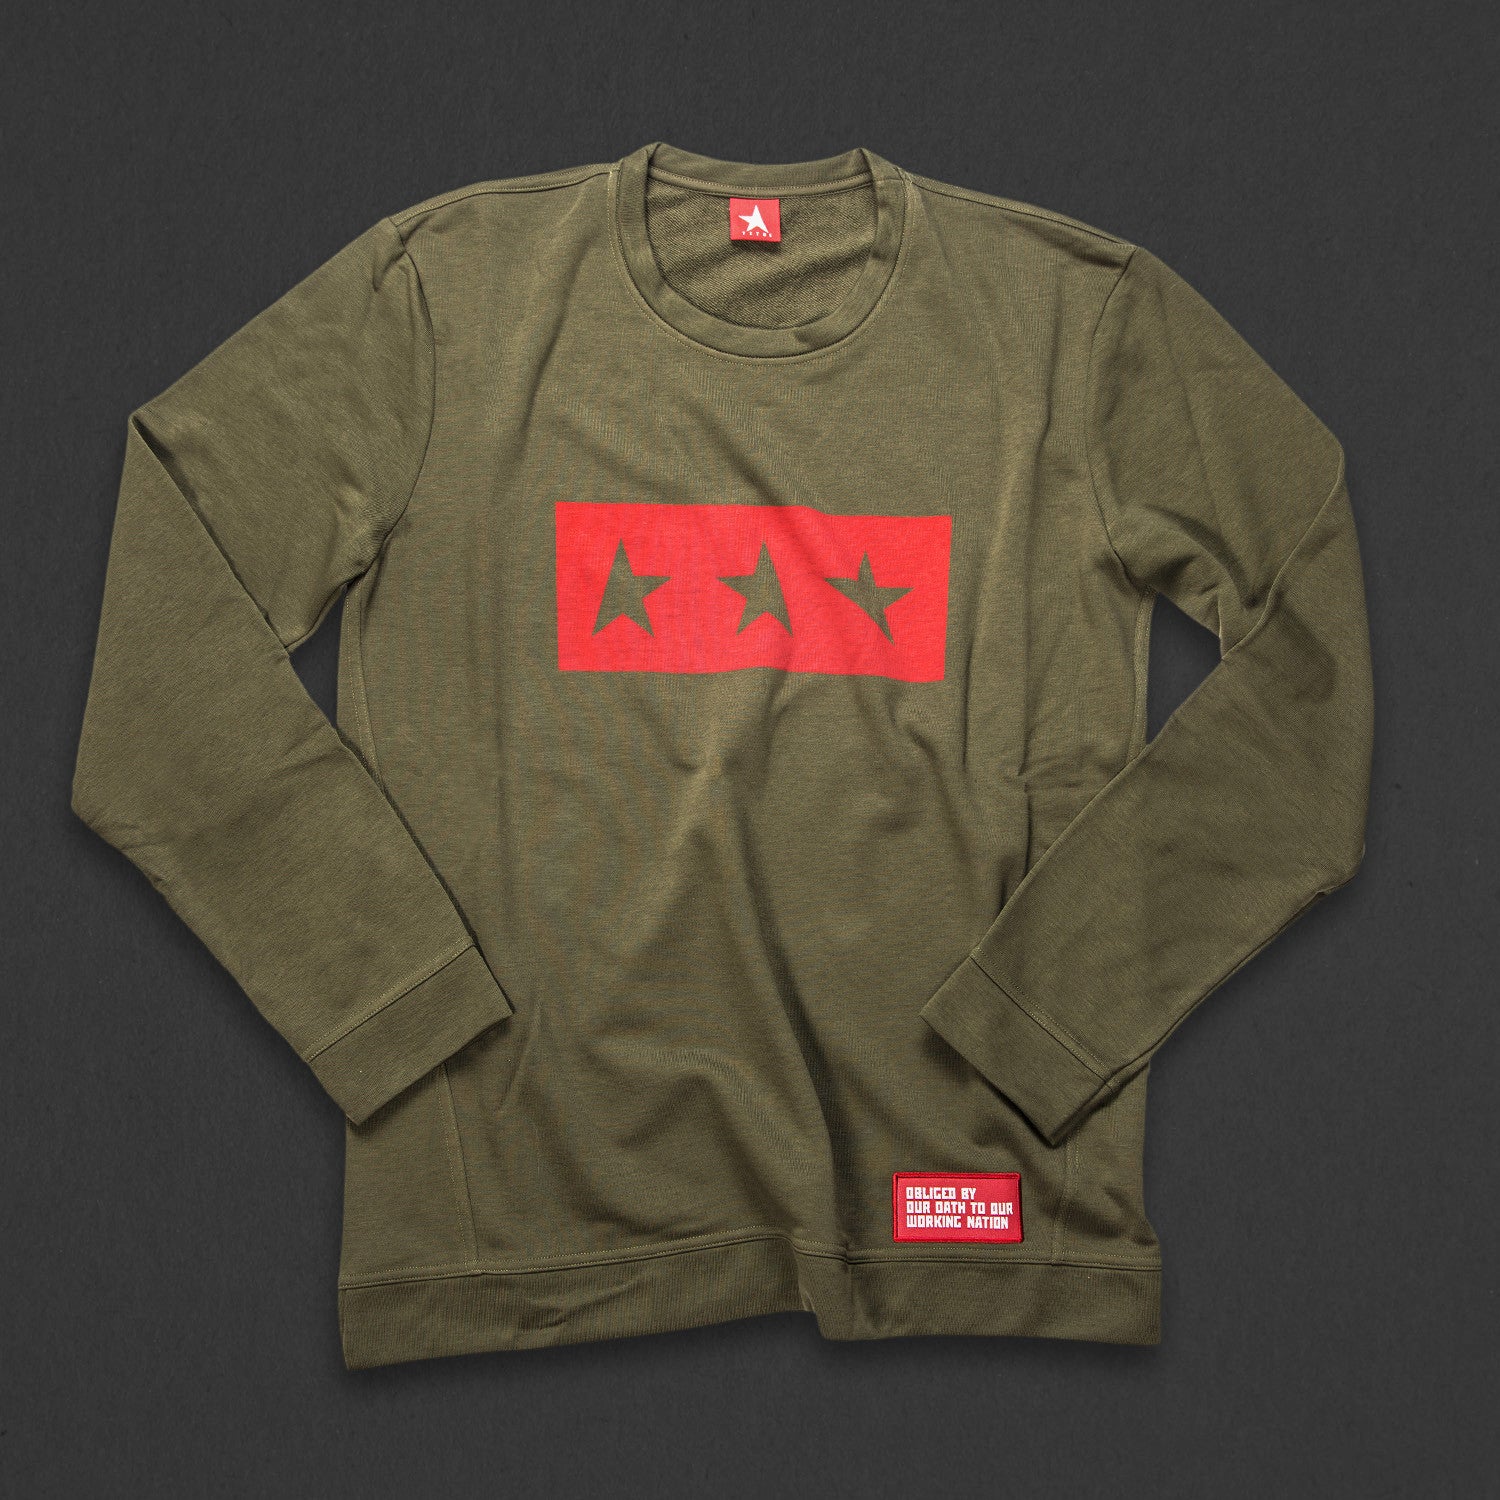 13th long sleeve TITOS T-shirt olive/red 3 star logo